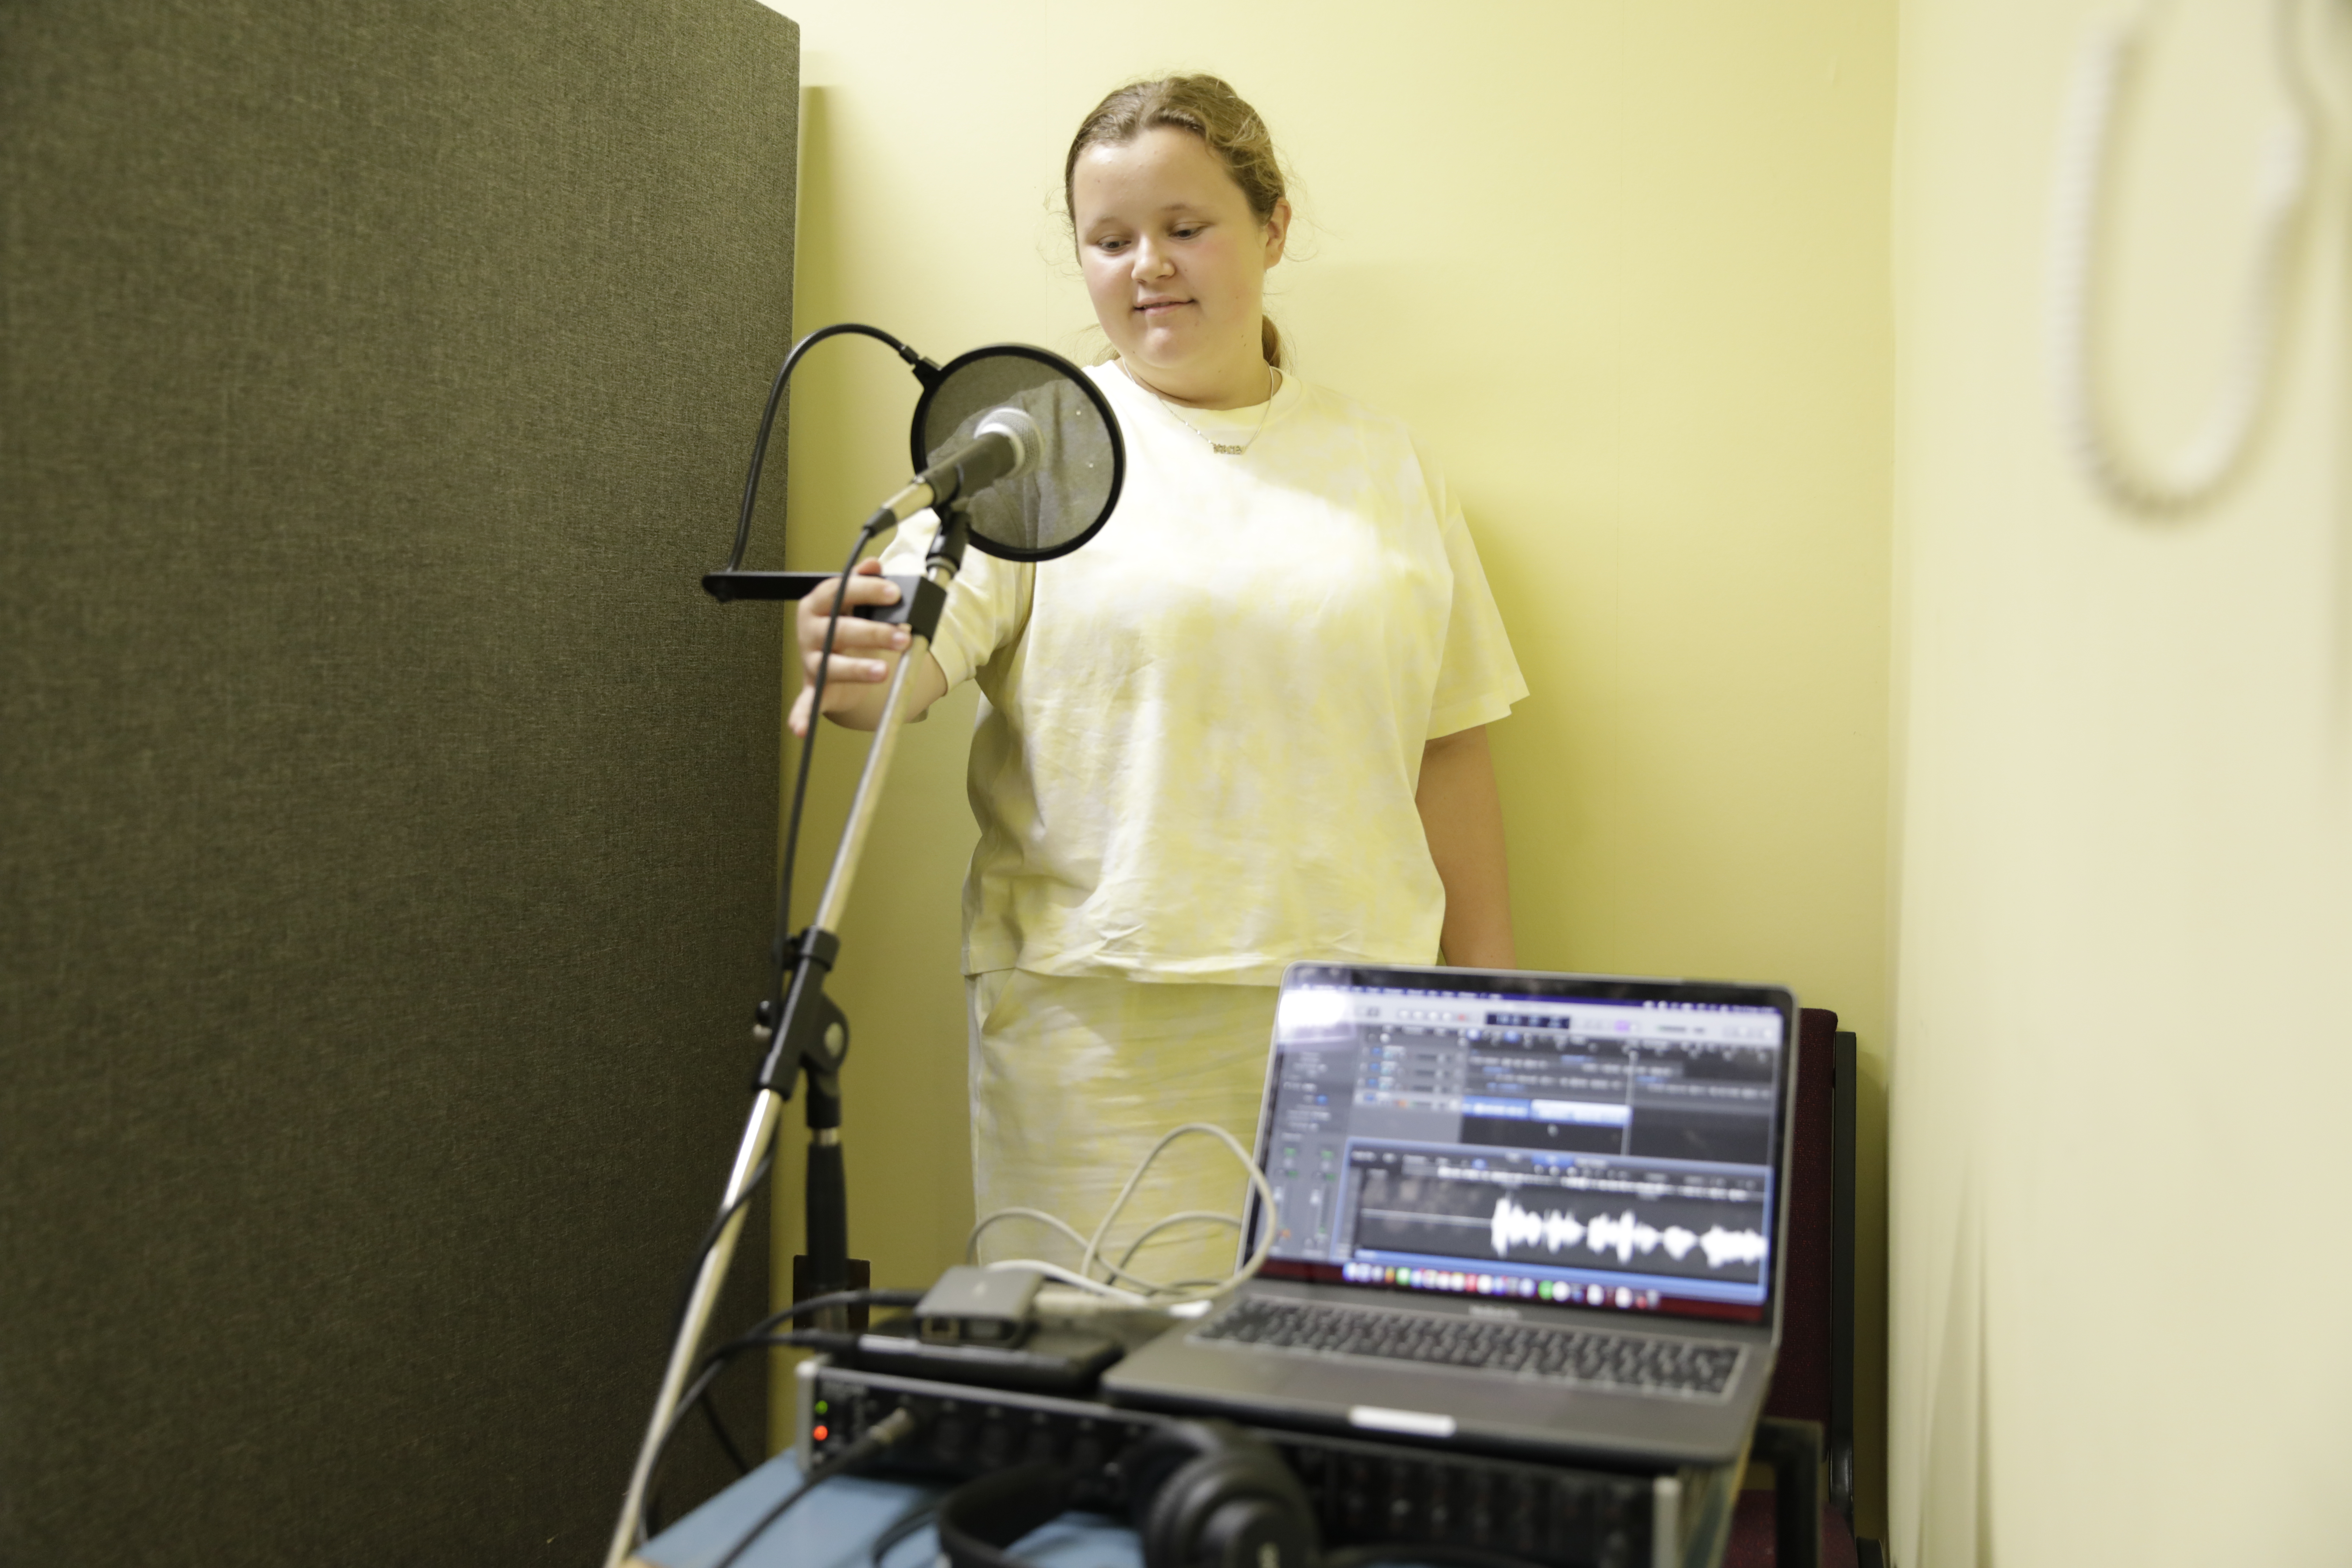 A young person recording vocals